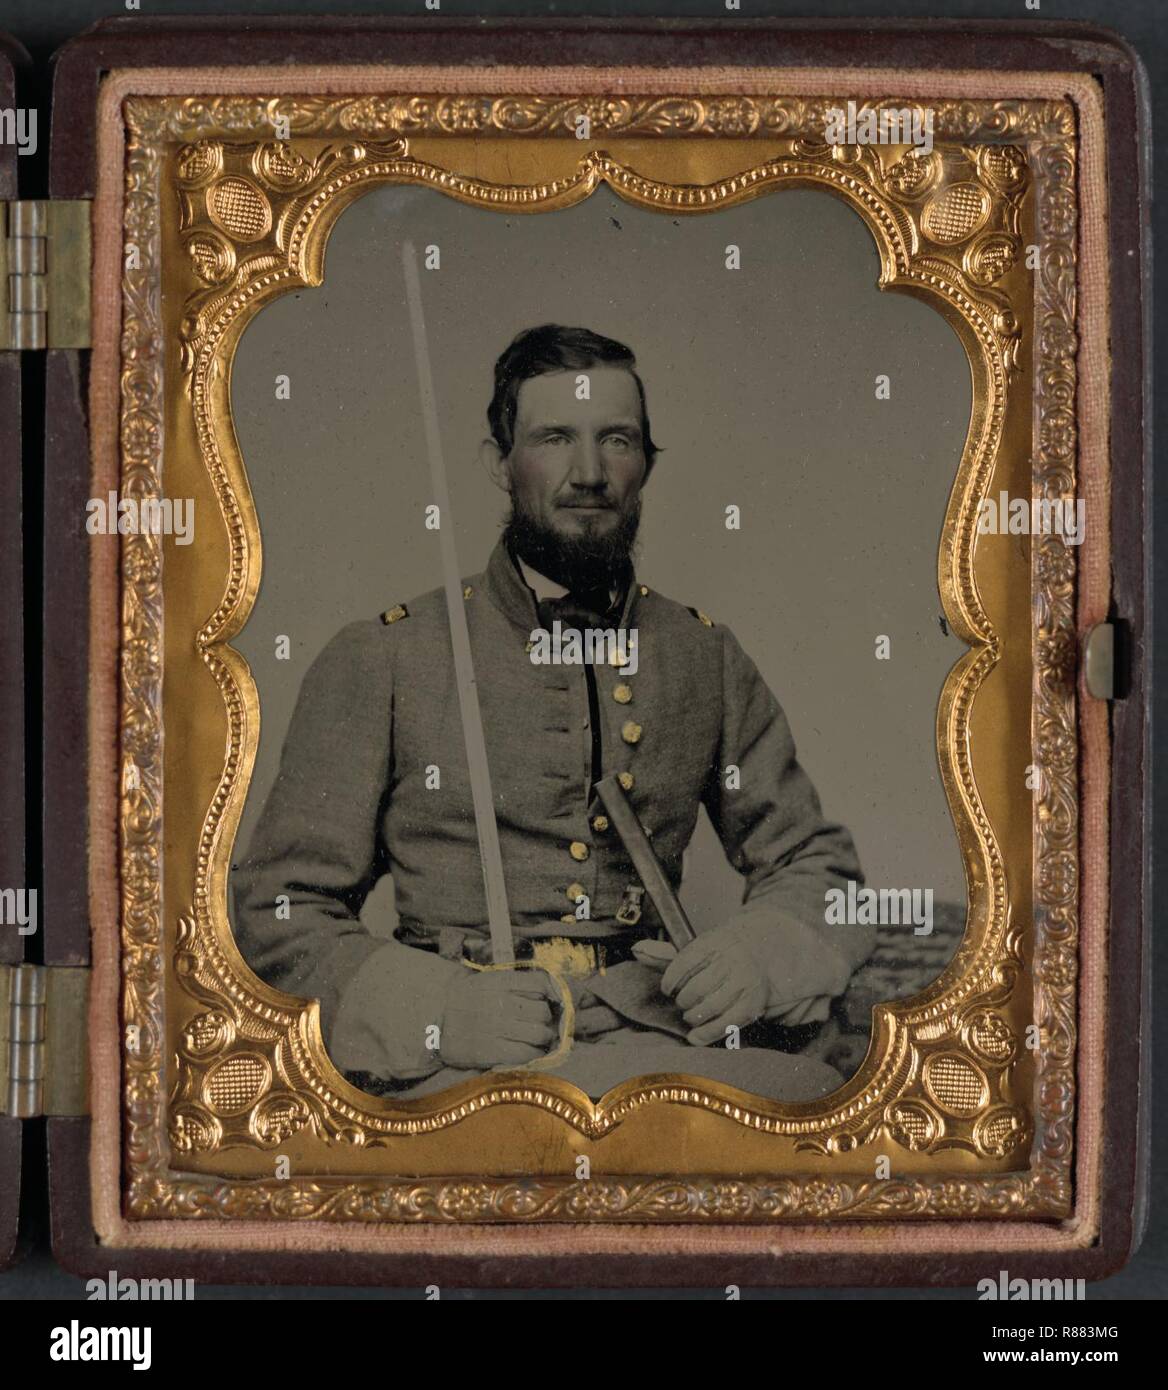 Captain David Thompson of Caldwell Minute Men (later Caldwell LIght Infantry); Company D, 1st Infantry Regiment 4th Division Missouri State Guard; and Company H, 2nd Missouri Infantry Stock Photo